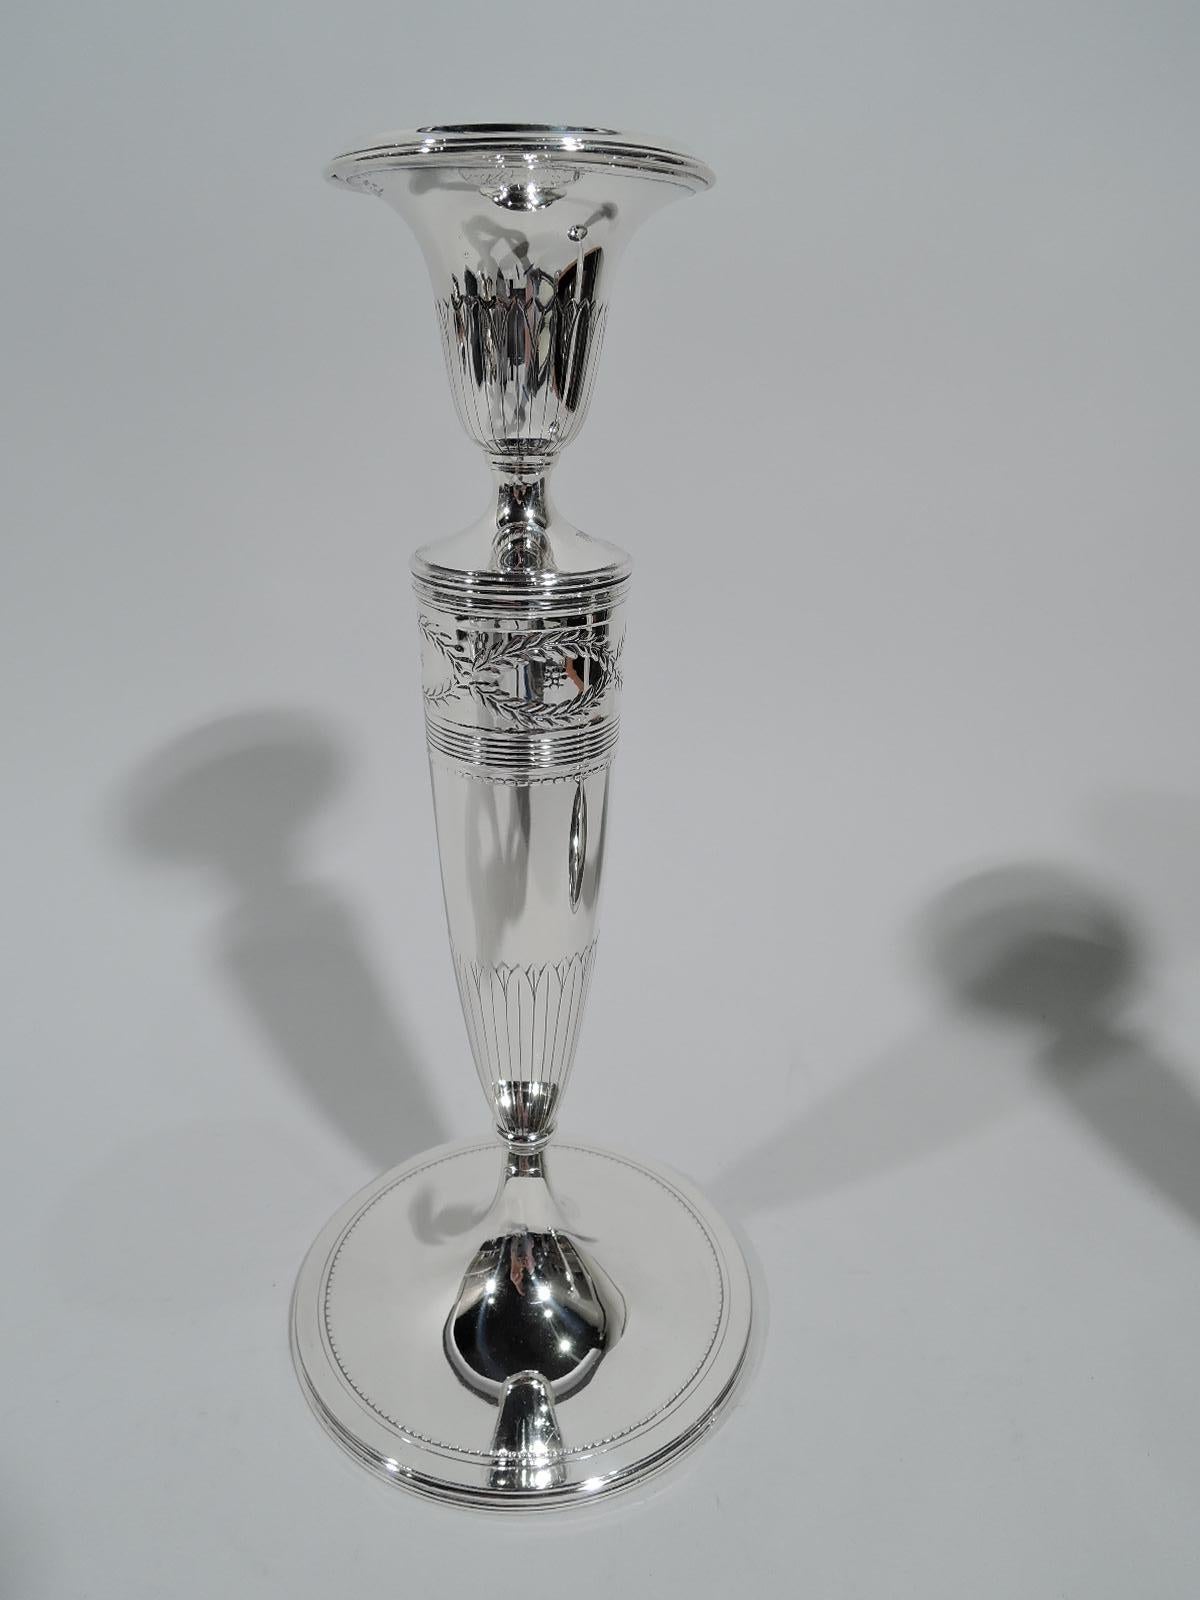 Pair of Winthrop sterling silver candlesticks. Made by Tiffany & Co. in New York, circa 1911. Each: Tapering columnar shaft on raised foot. Urn socket with detachable bobeche. Shaft top has the classic laurel-wreath border inset with flower heads.